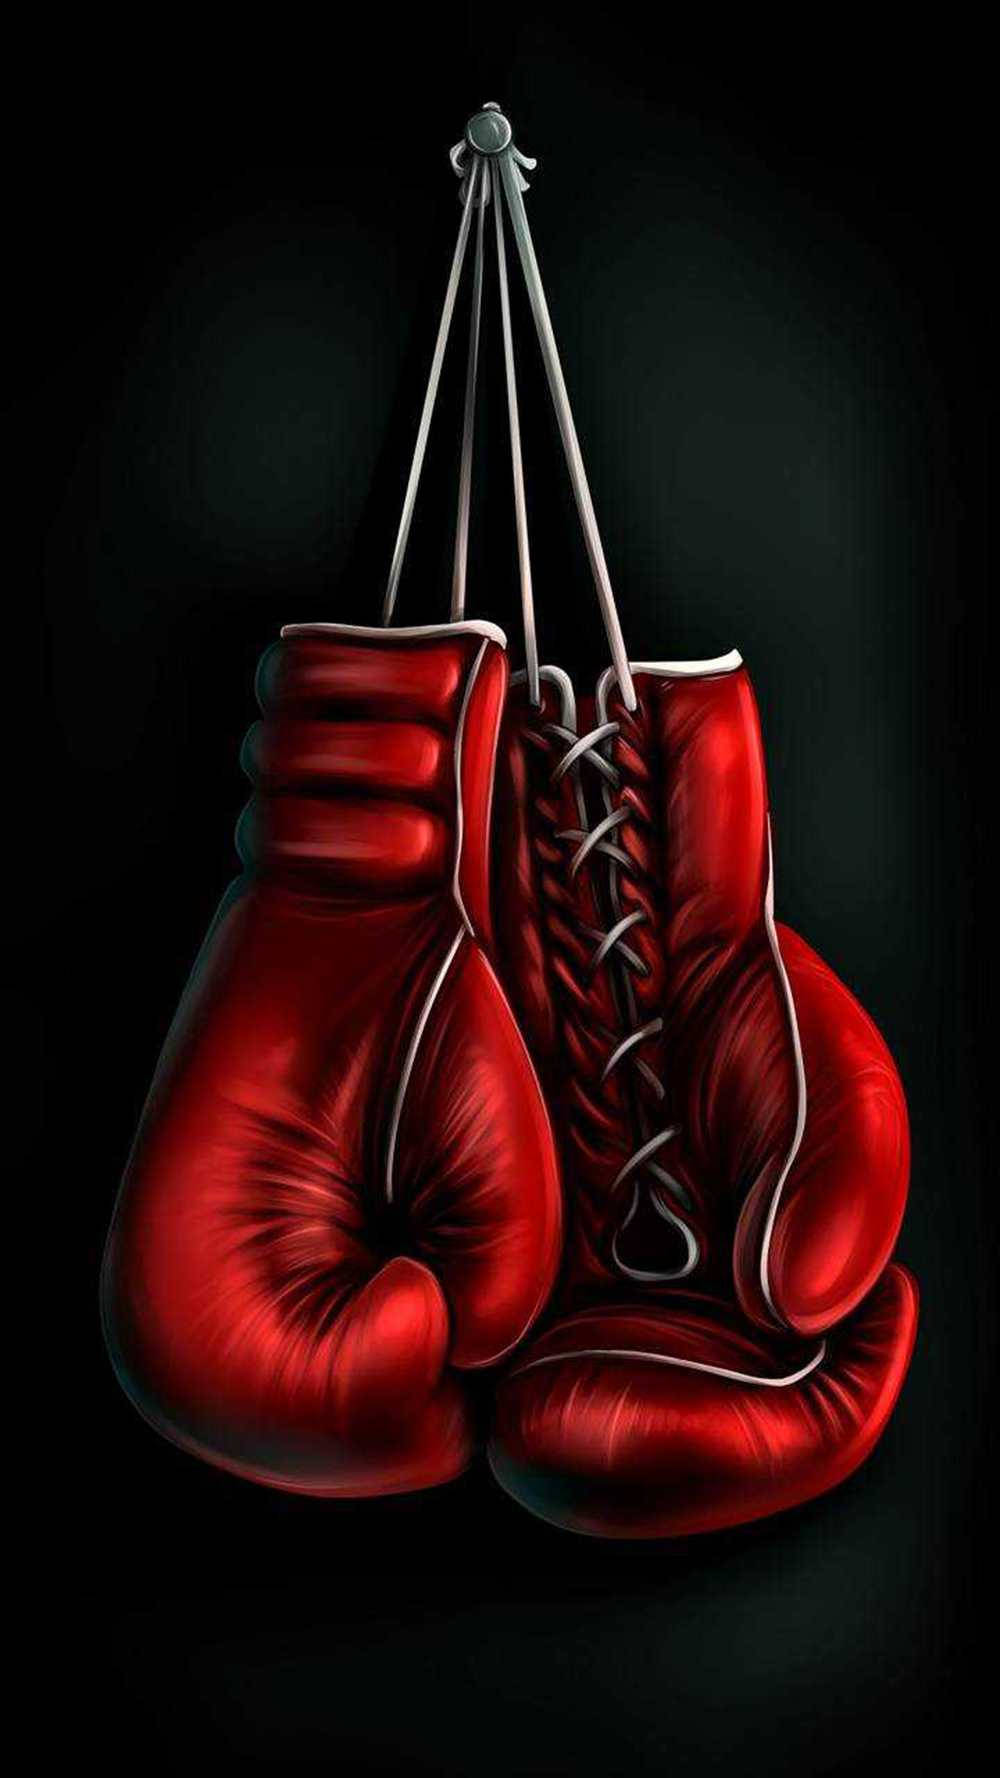 Get inspired to hit the gym with a cool boxing image Wallpaper